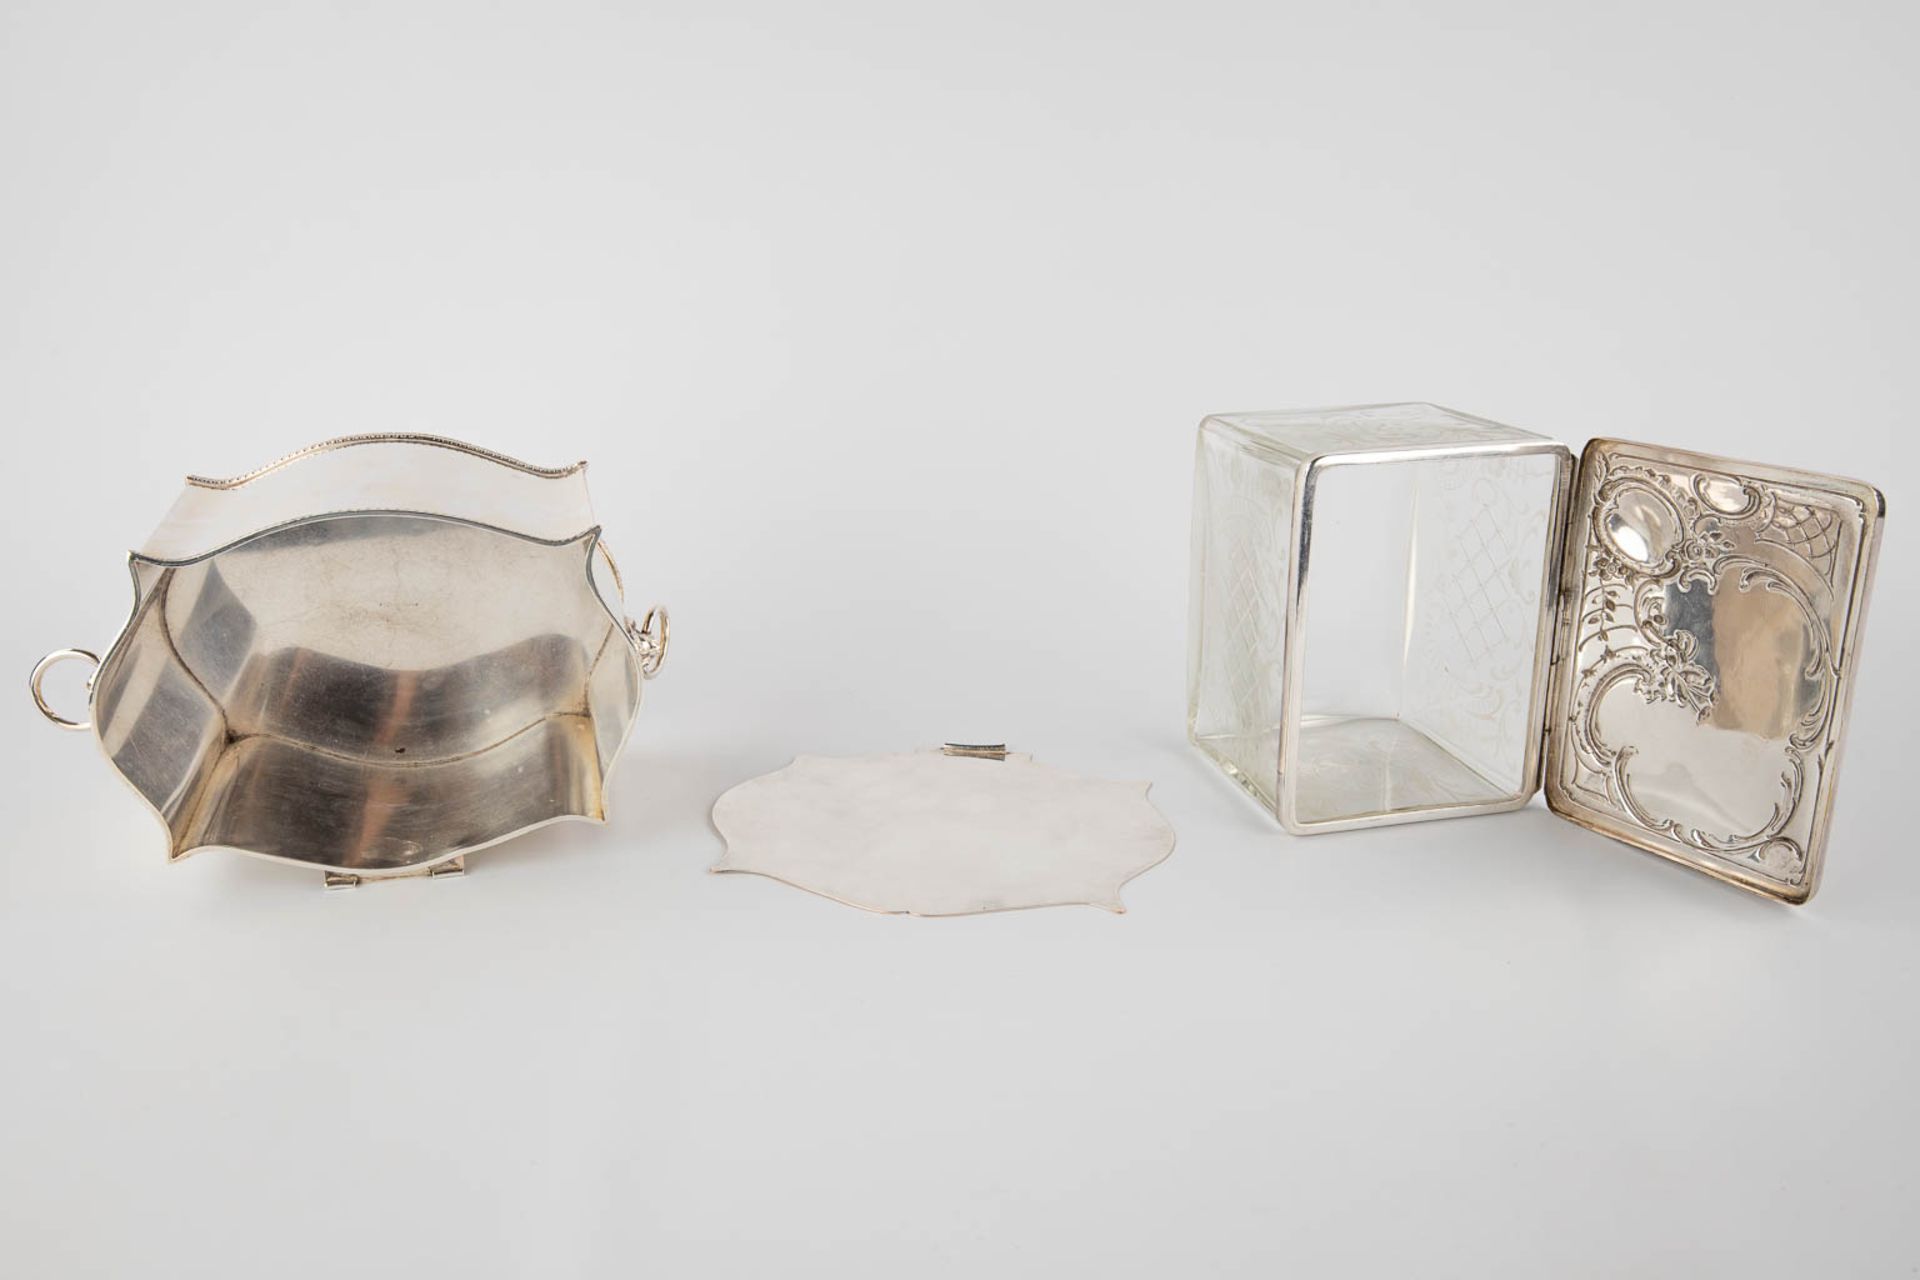 Four silver-plated storage boxes, ice-pails. (H:27 x D:20 cm) - Image 16 of 20